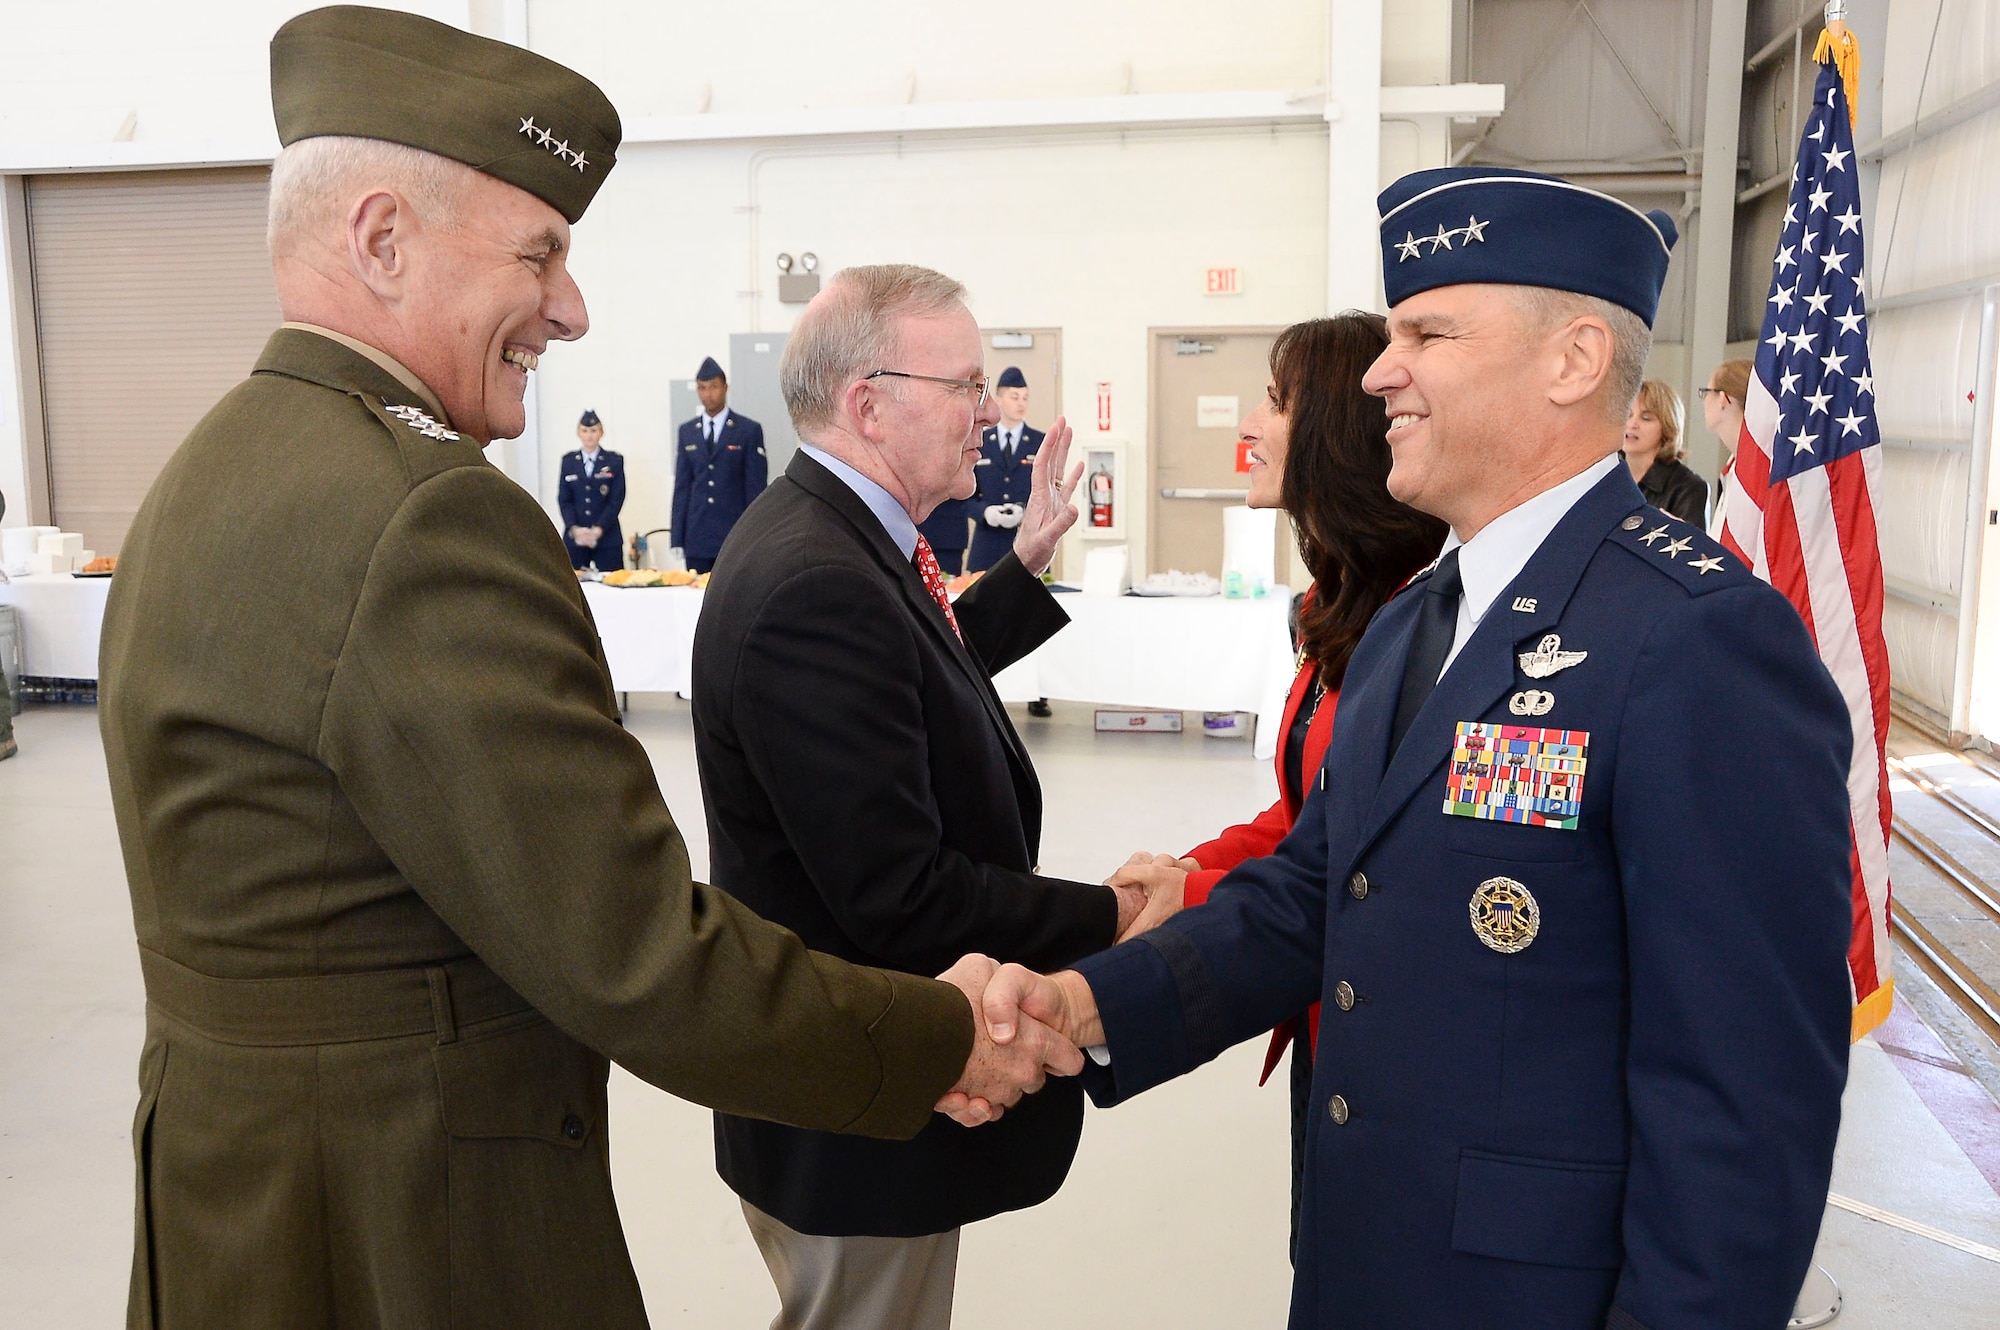 Gen. John Kelly, United States Southern Command Commander, congratulates Lt. Gen. Chris Nowland, 12th Air Force (Air Forces Southern) commander, after a change of command ceremony at Davis-Monthan AFB, Ariz., Dec. 19, 2014. Nowland comes to Tucson from his previous assignment as the Chief of Staff, Headquarters United States Southern Command, where he was responsible for successfully integrating and synchronizing the efforts of nine directorates and 16 special staff offices in support of the Combatant Commander's Theater Campaign Plan. (U.S. Air Force photo by Staff Sgt. Adam Grant/Released)